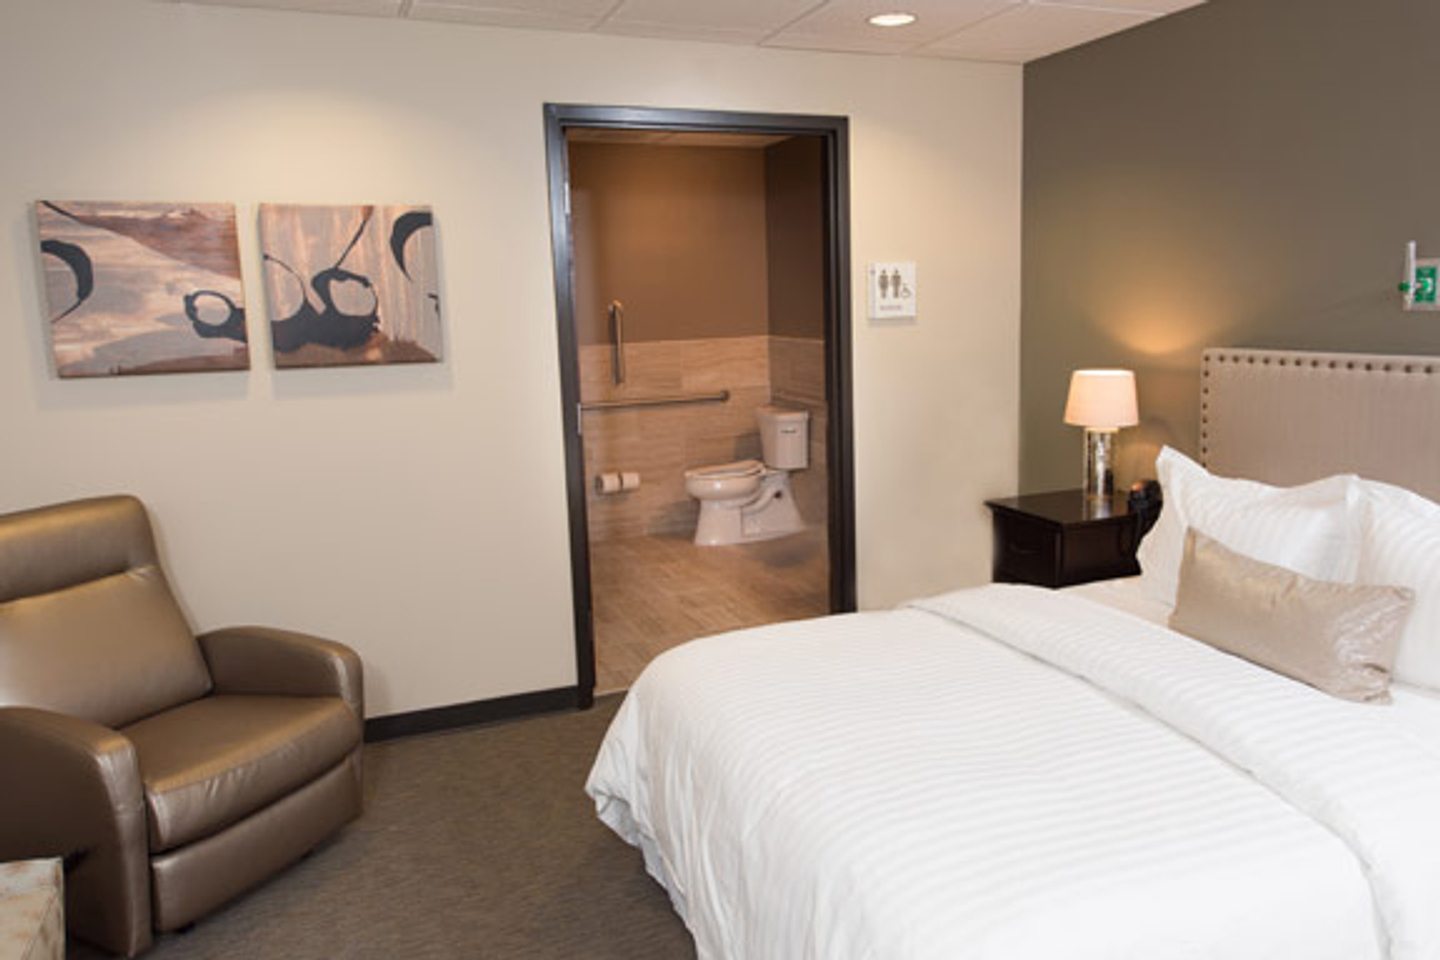 A sleep center room featuring a brown reclining chair, guest bed, and bathroom. 